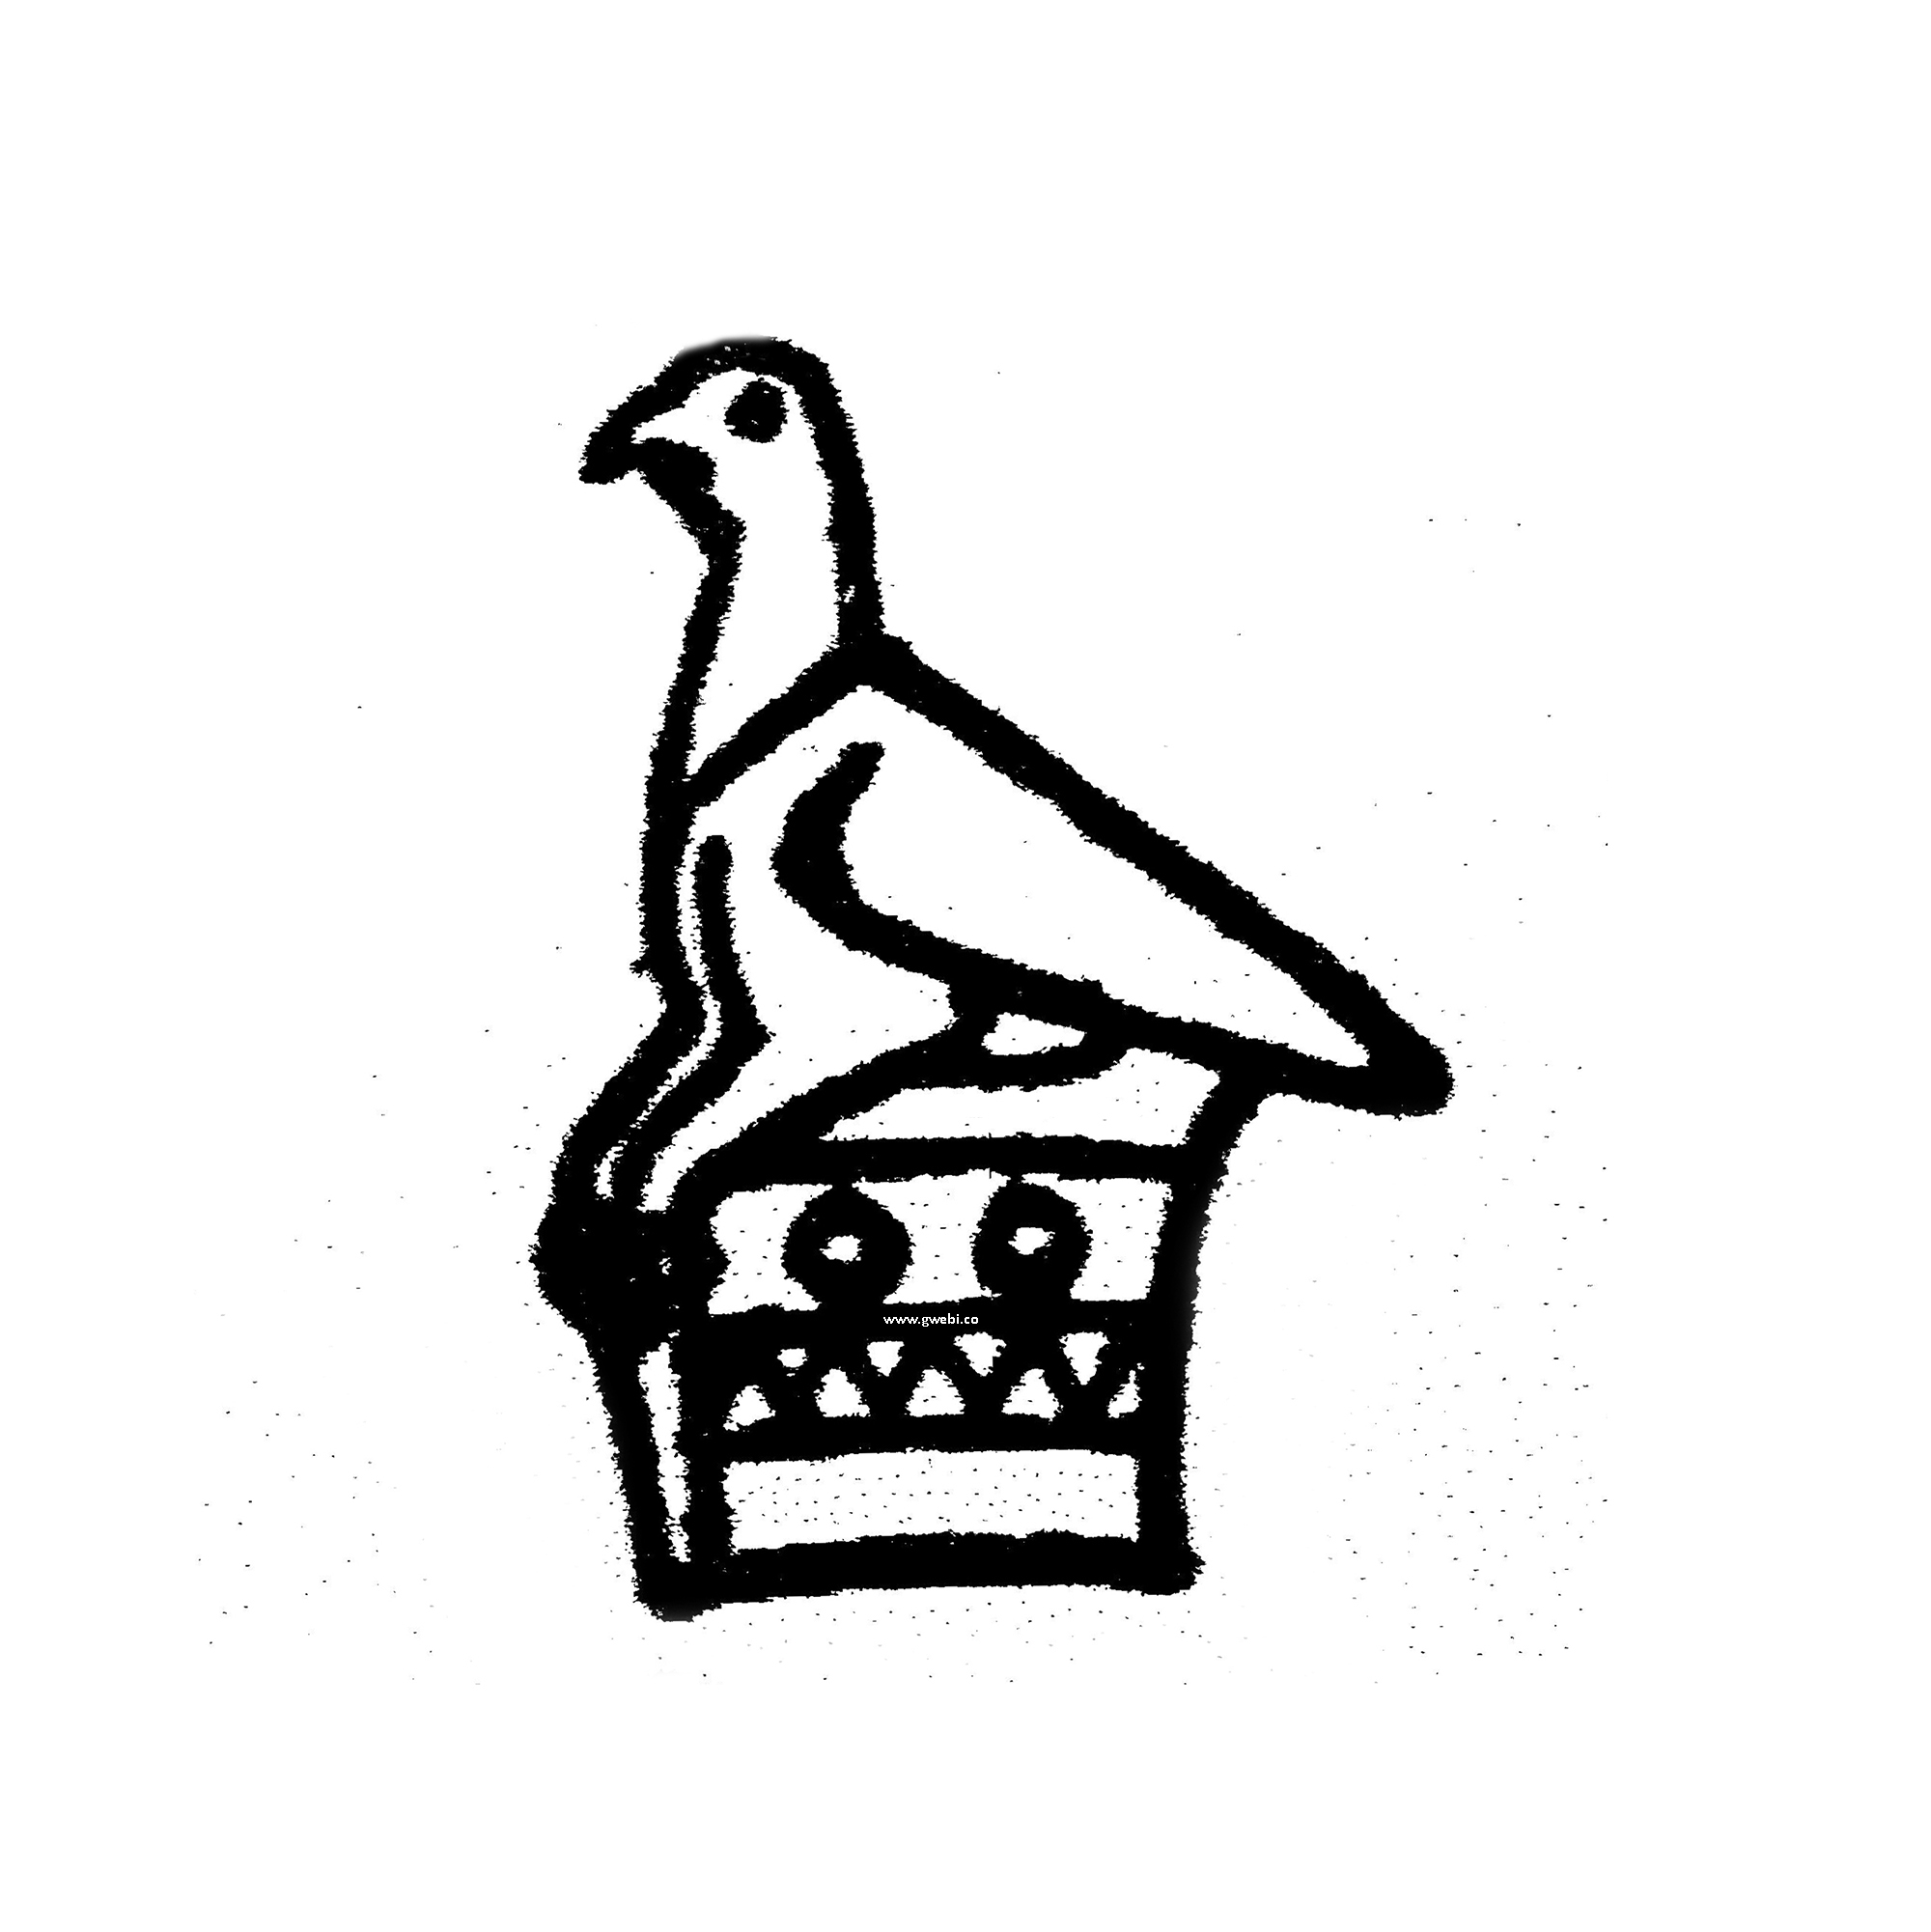 Logo for Gwebi college of Agriculture being a Zimbabwe bird